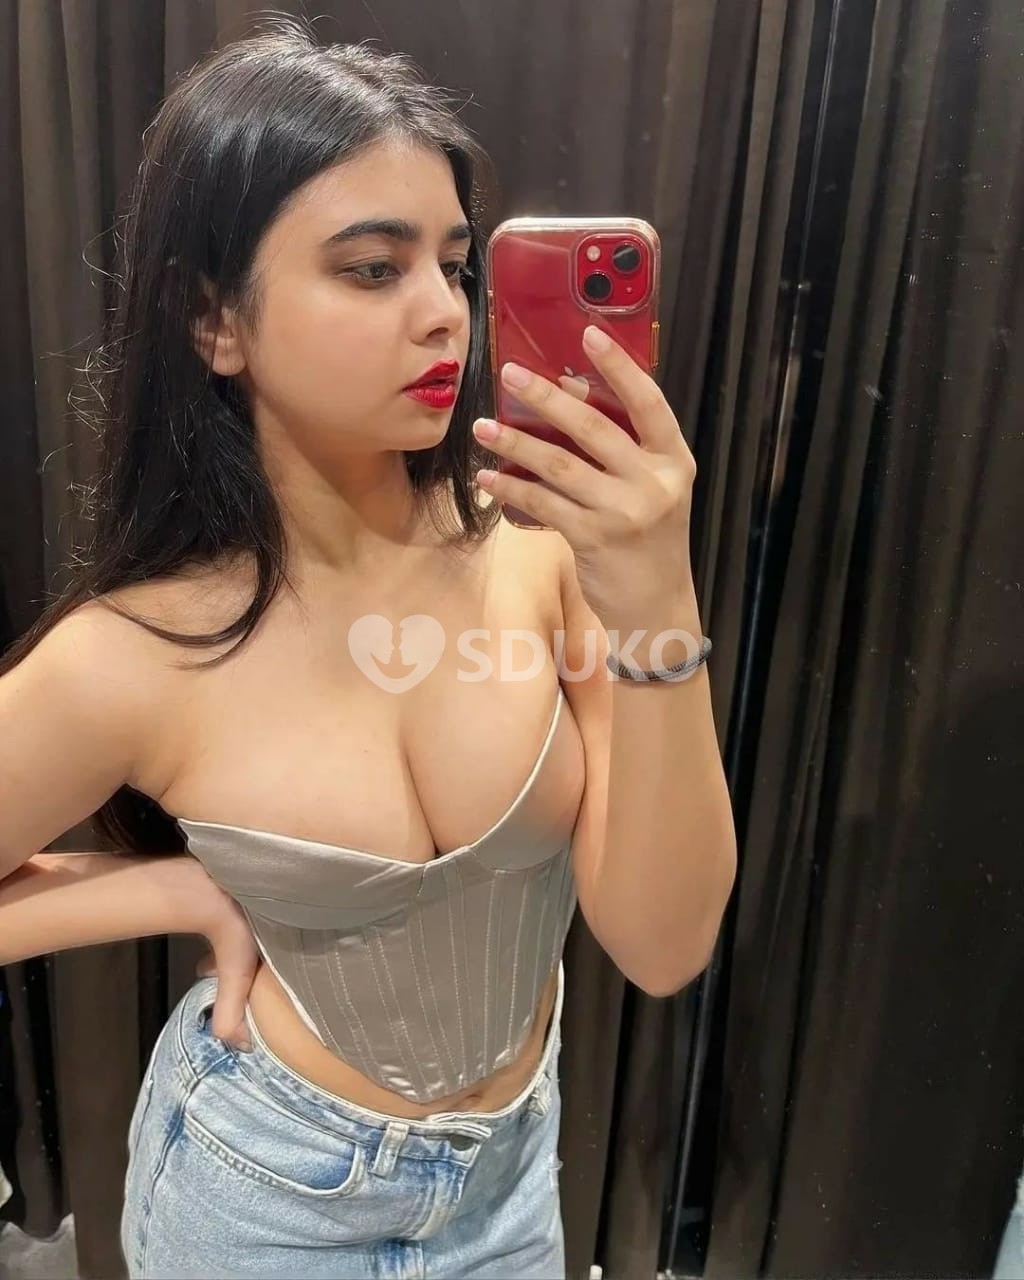 ANDHERI 💥 24×7 DOORSTEP  INCALL ❤ OUTCALL SERVICE AVAILABLE CALL ME NOW LOW RATE PRIVATE DECENT LOCAL COLLAGE GIRL